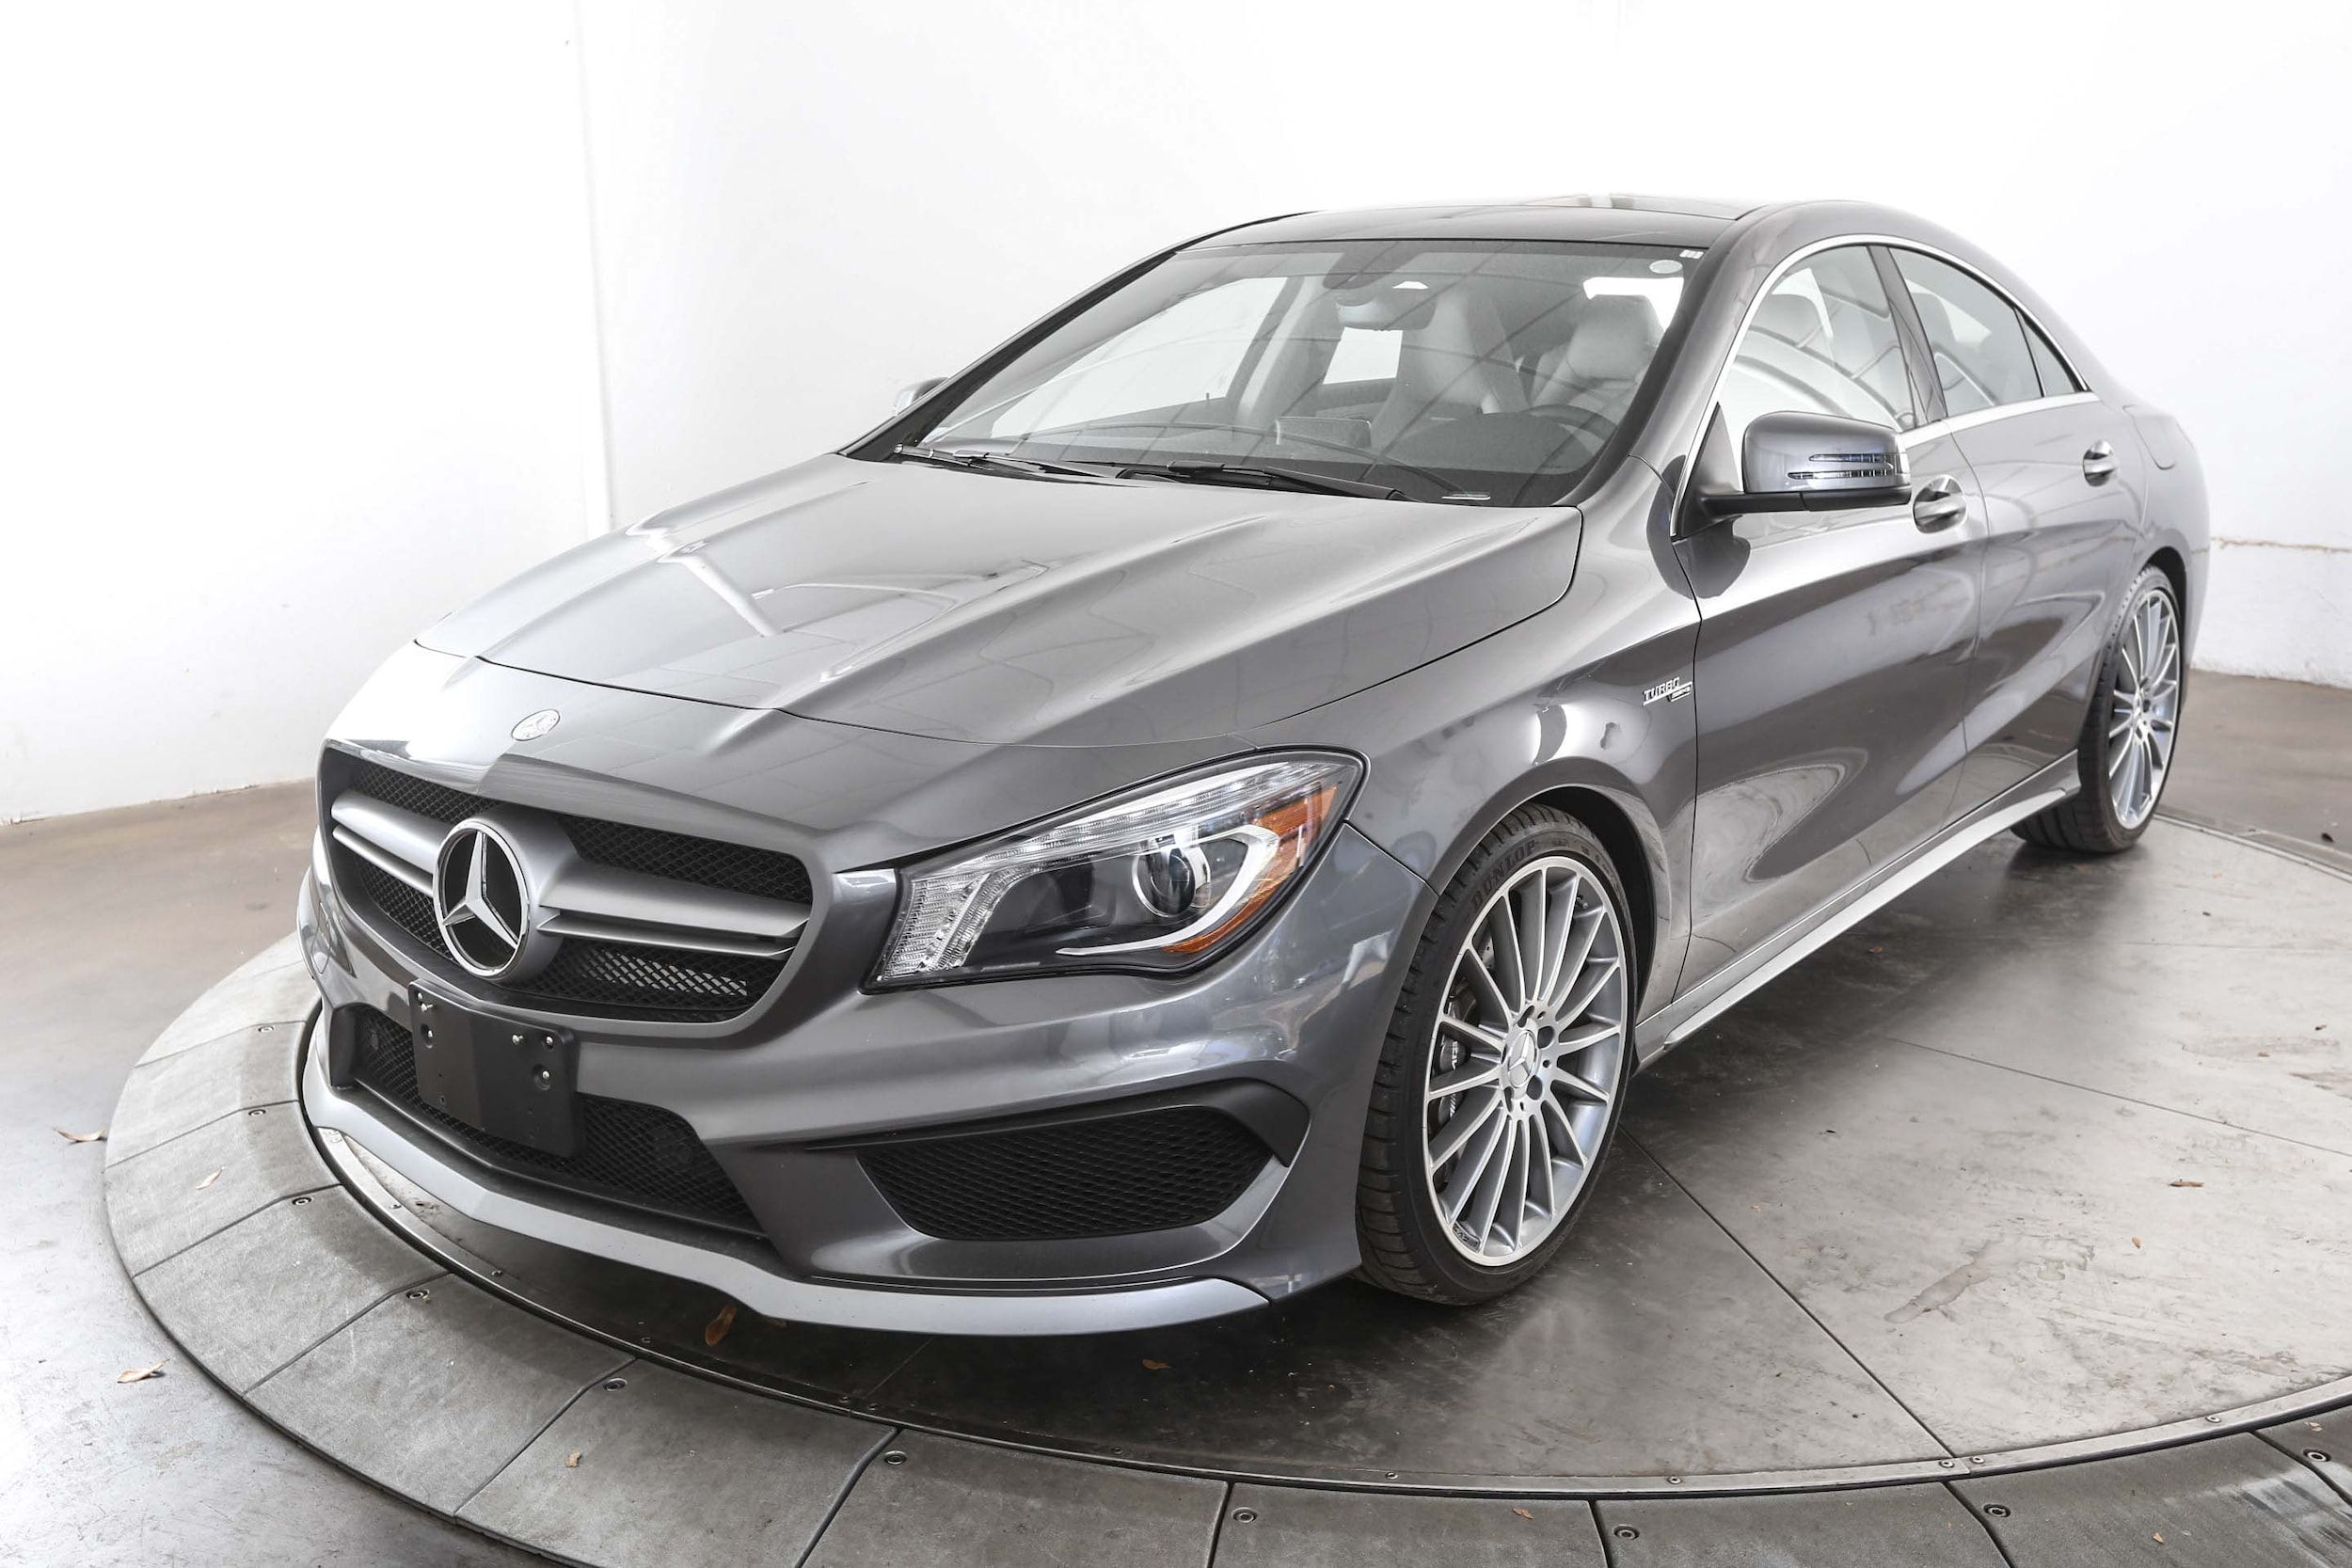 Used mercedes benz for sale in austin #4